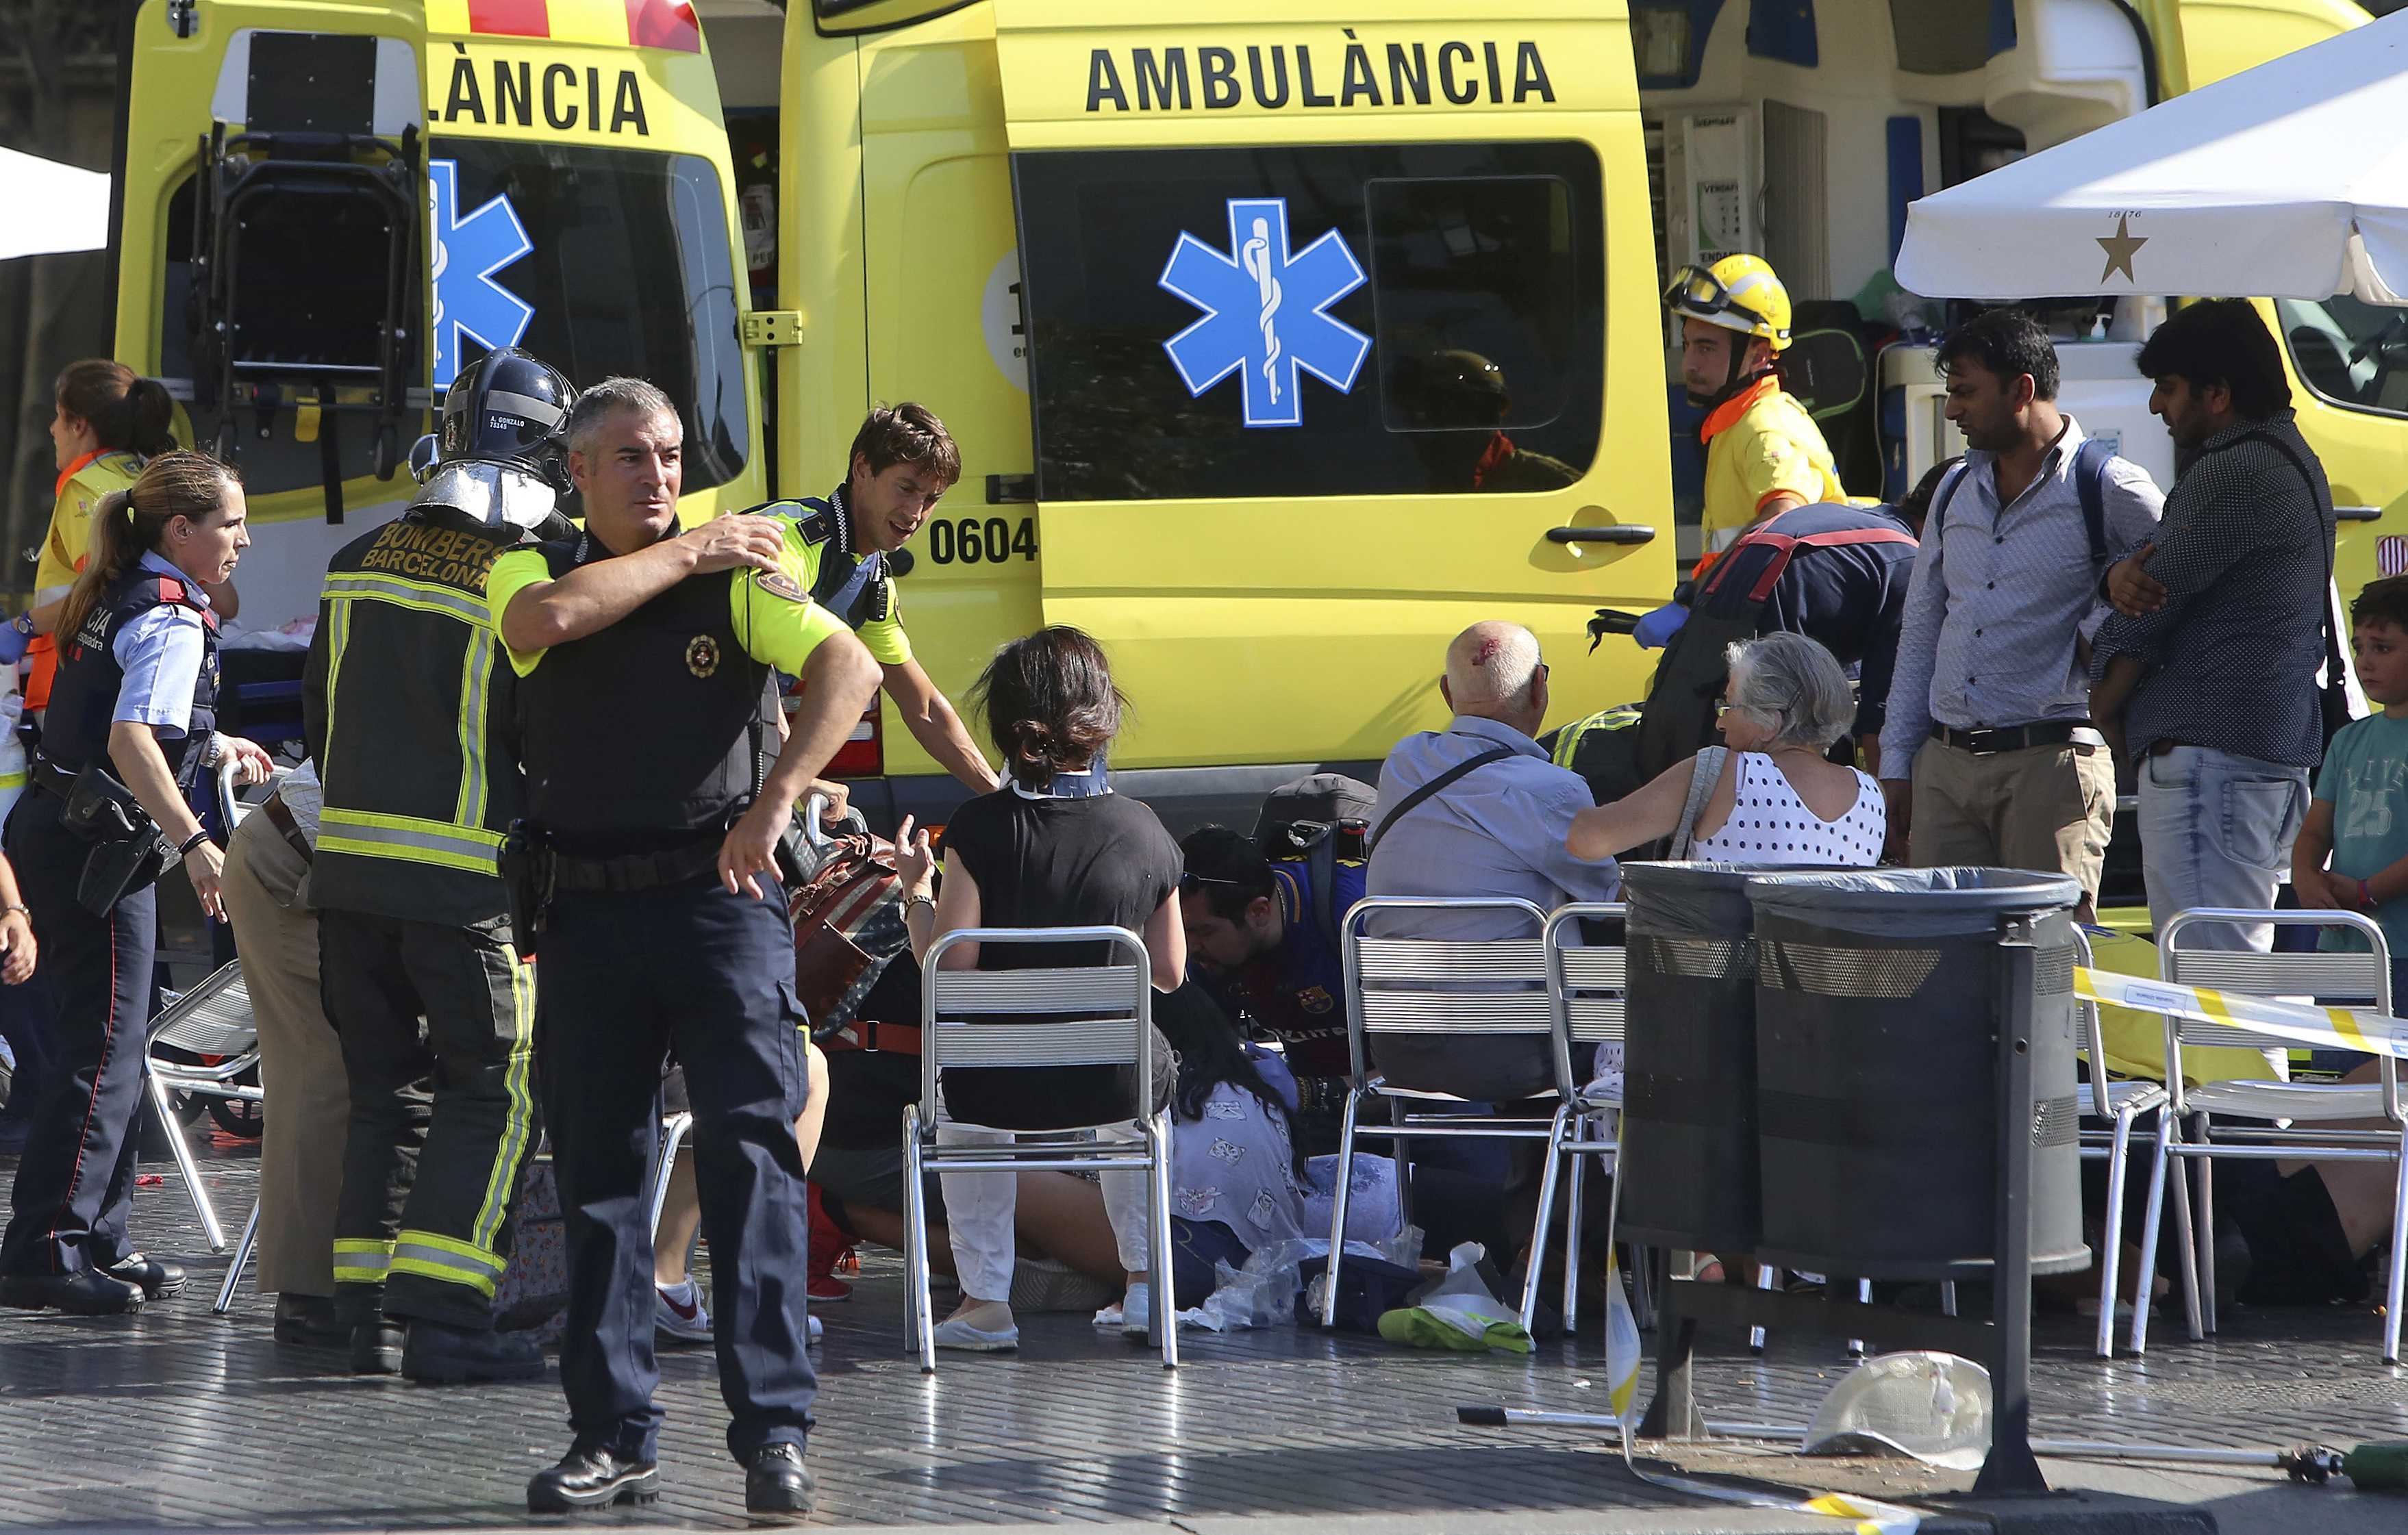 ​ISIS claims responsibility for Barcelona attack that killed 13, injured more than 50